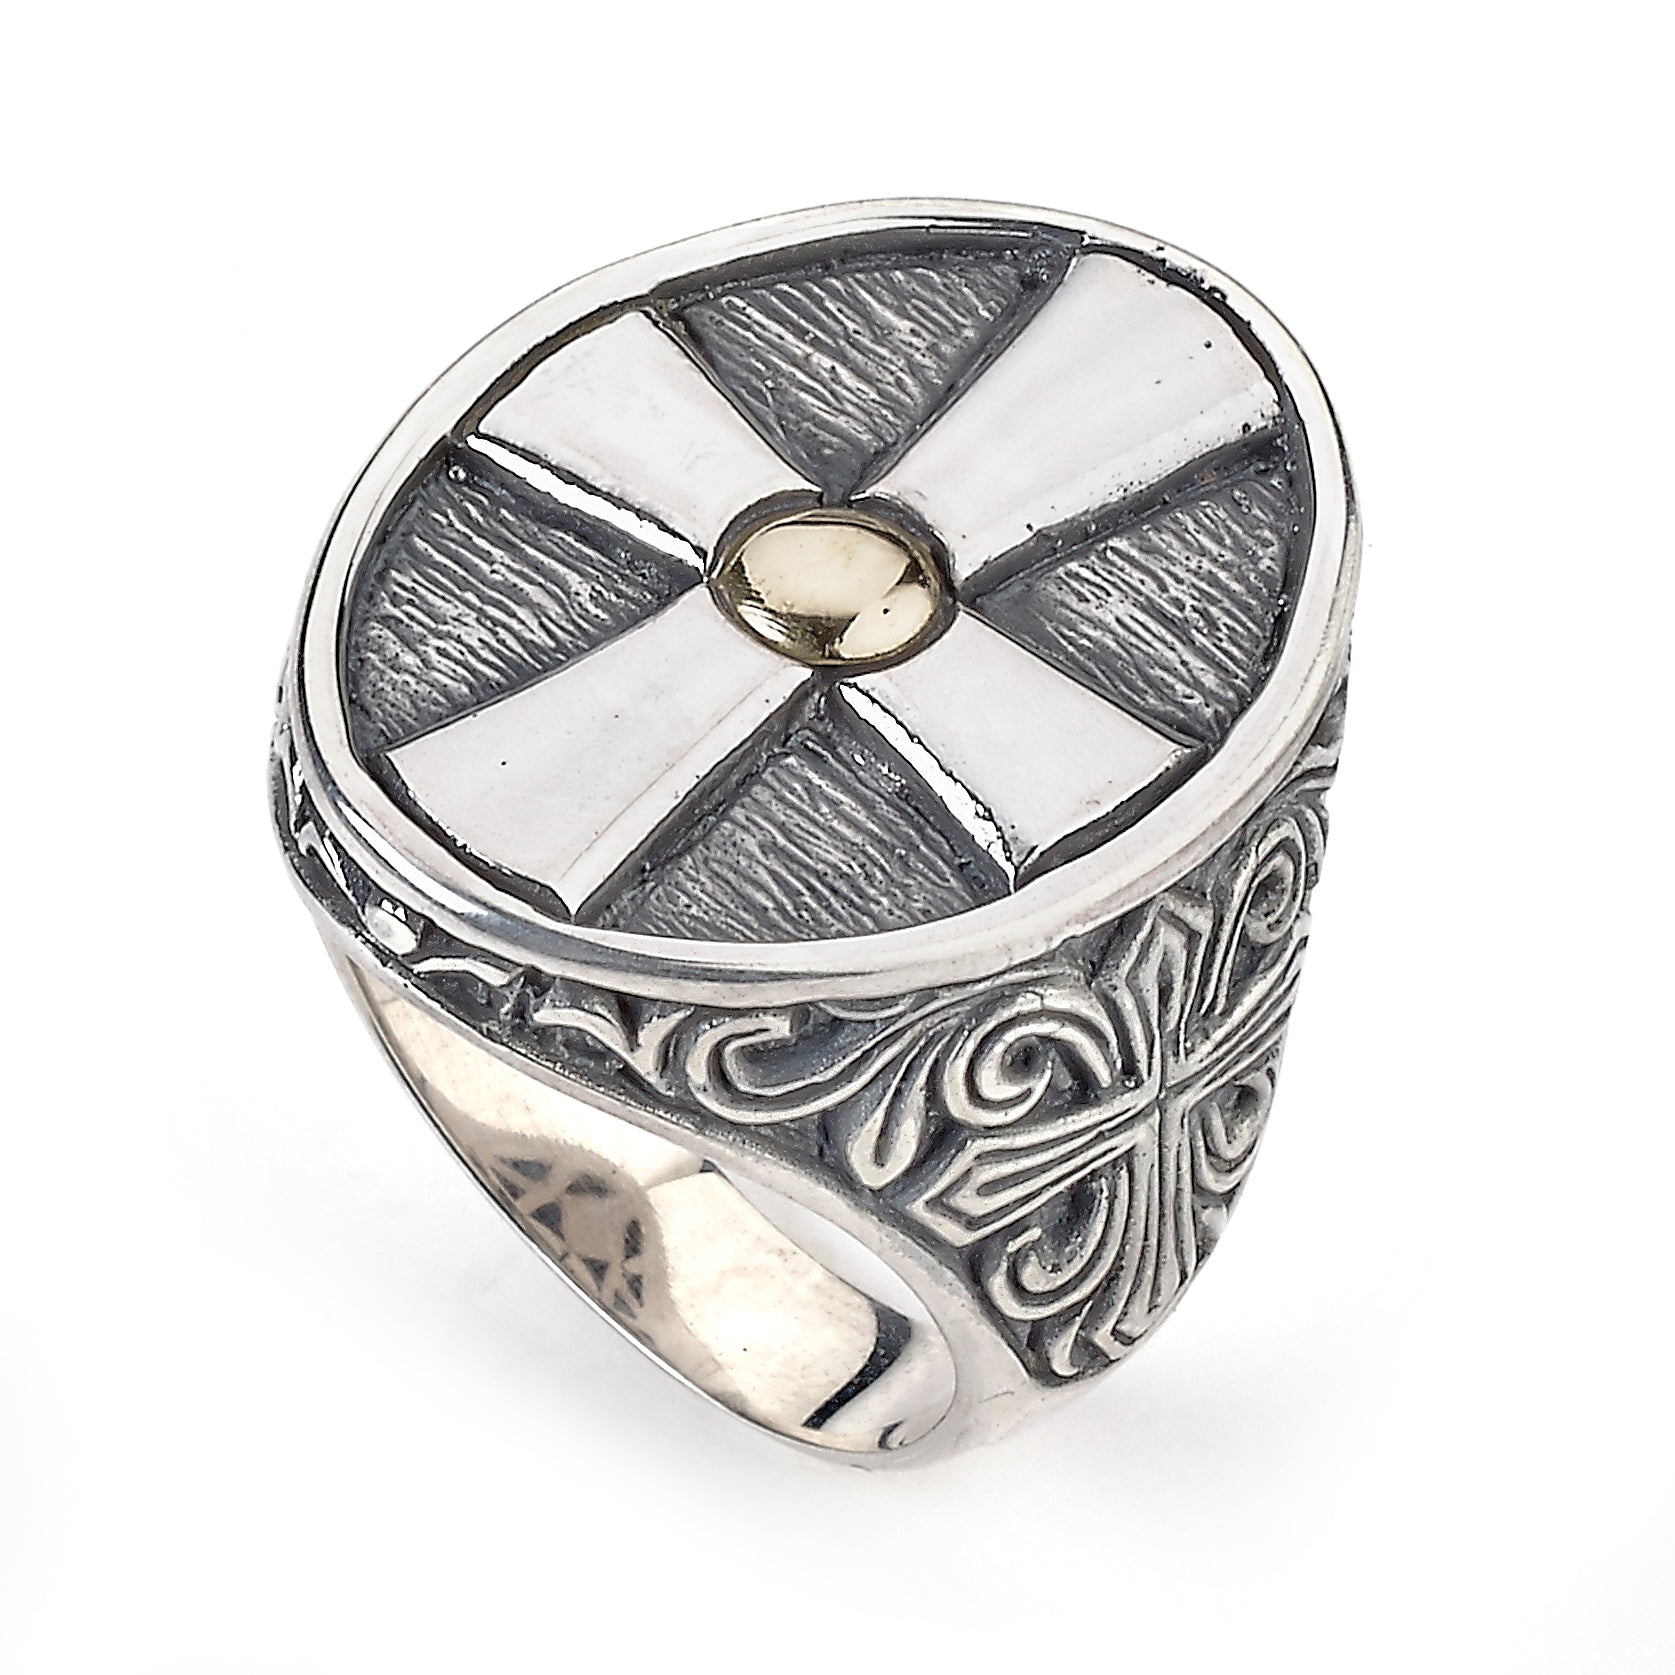 Devotion Ring Devotion Ring available at Talisman Collection Fine Jewelers in El Dorado Hills, CA and online. Specs: Devotion Ring crafted in Sterling Silver and 18k oval ring features a cross design. 